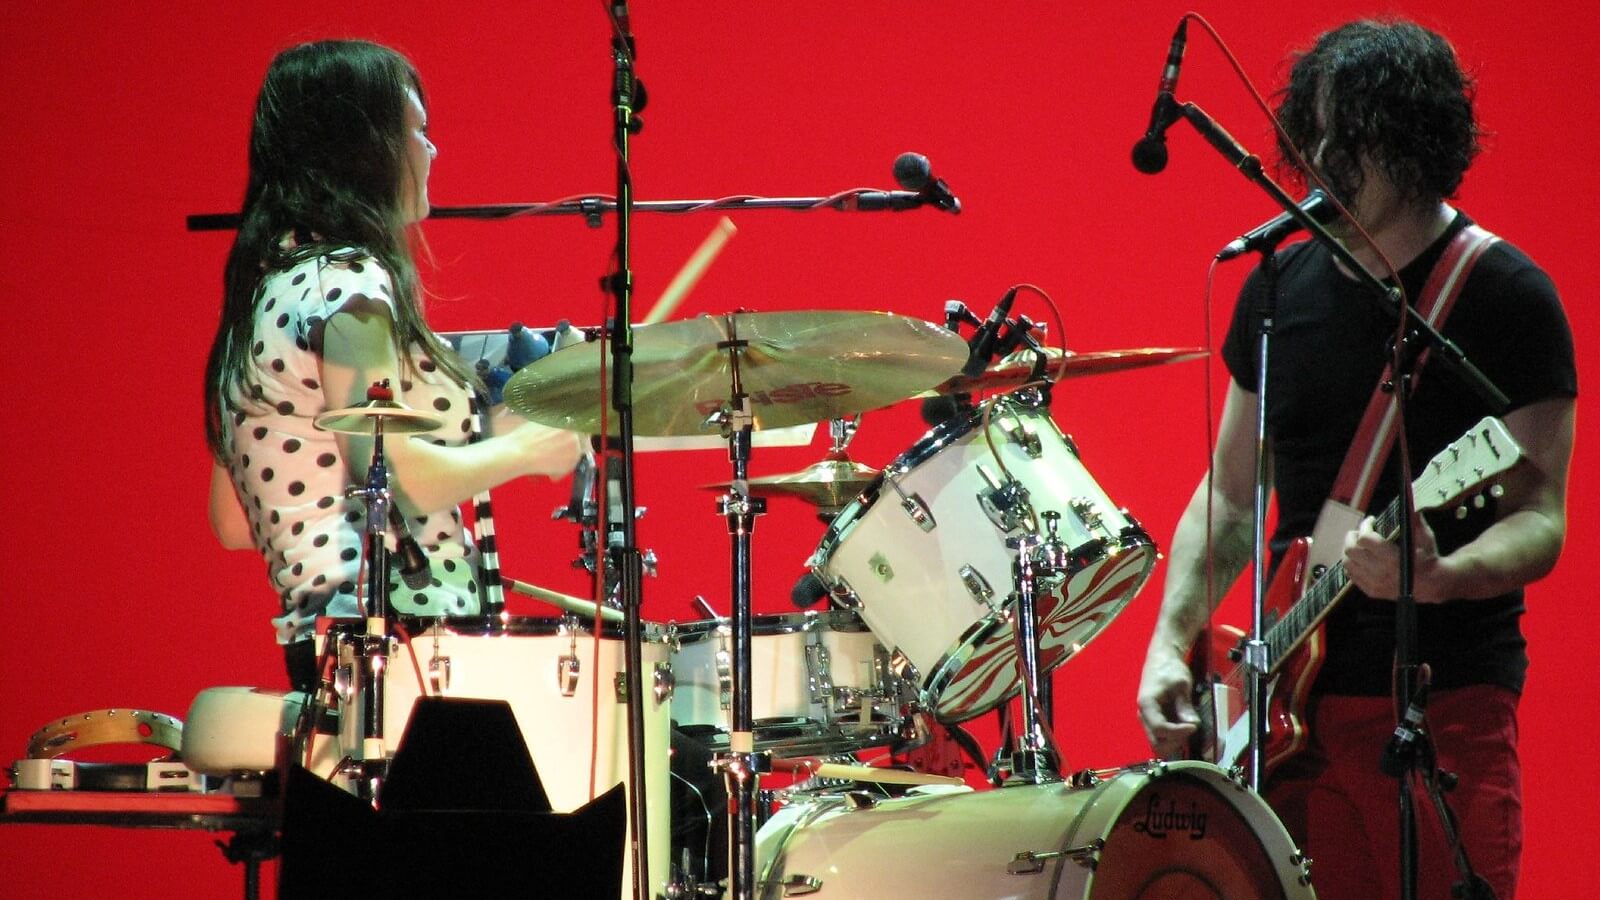 The iconic band The White Stripes during a concert